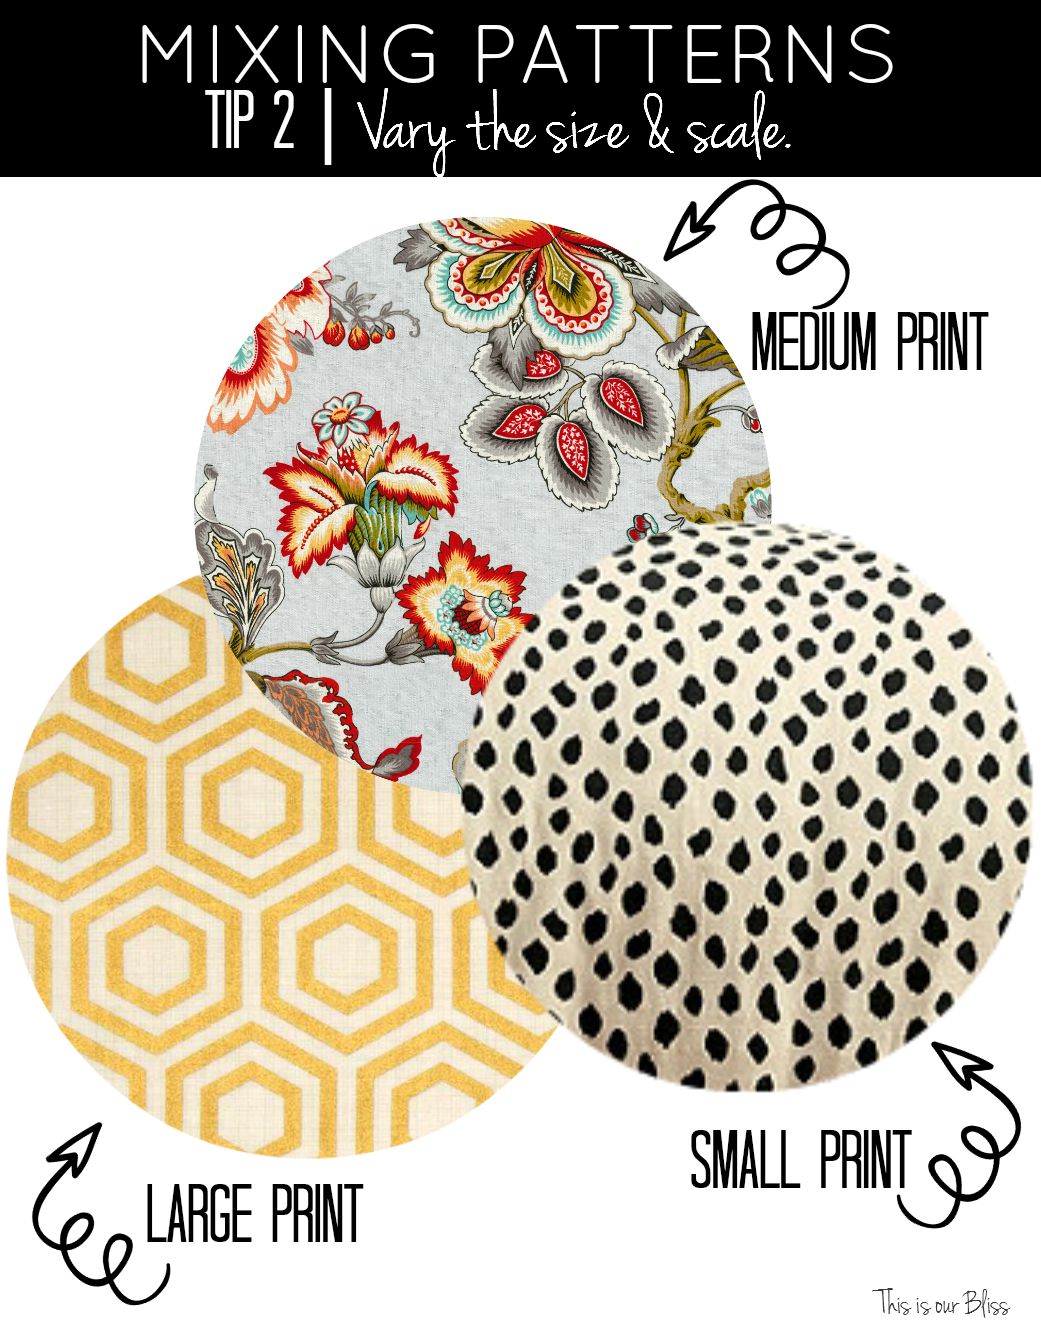 how to mix patterns - tip 2 - vary the size & scale - small, medium large - This is our Bliss